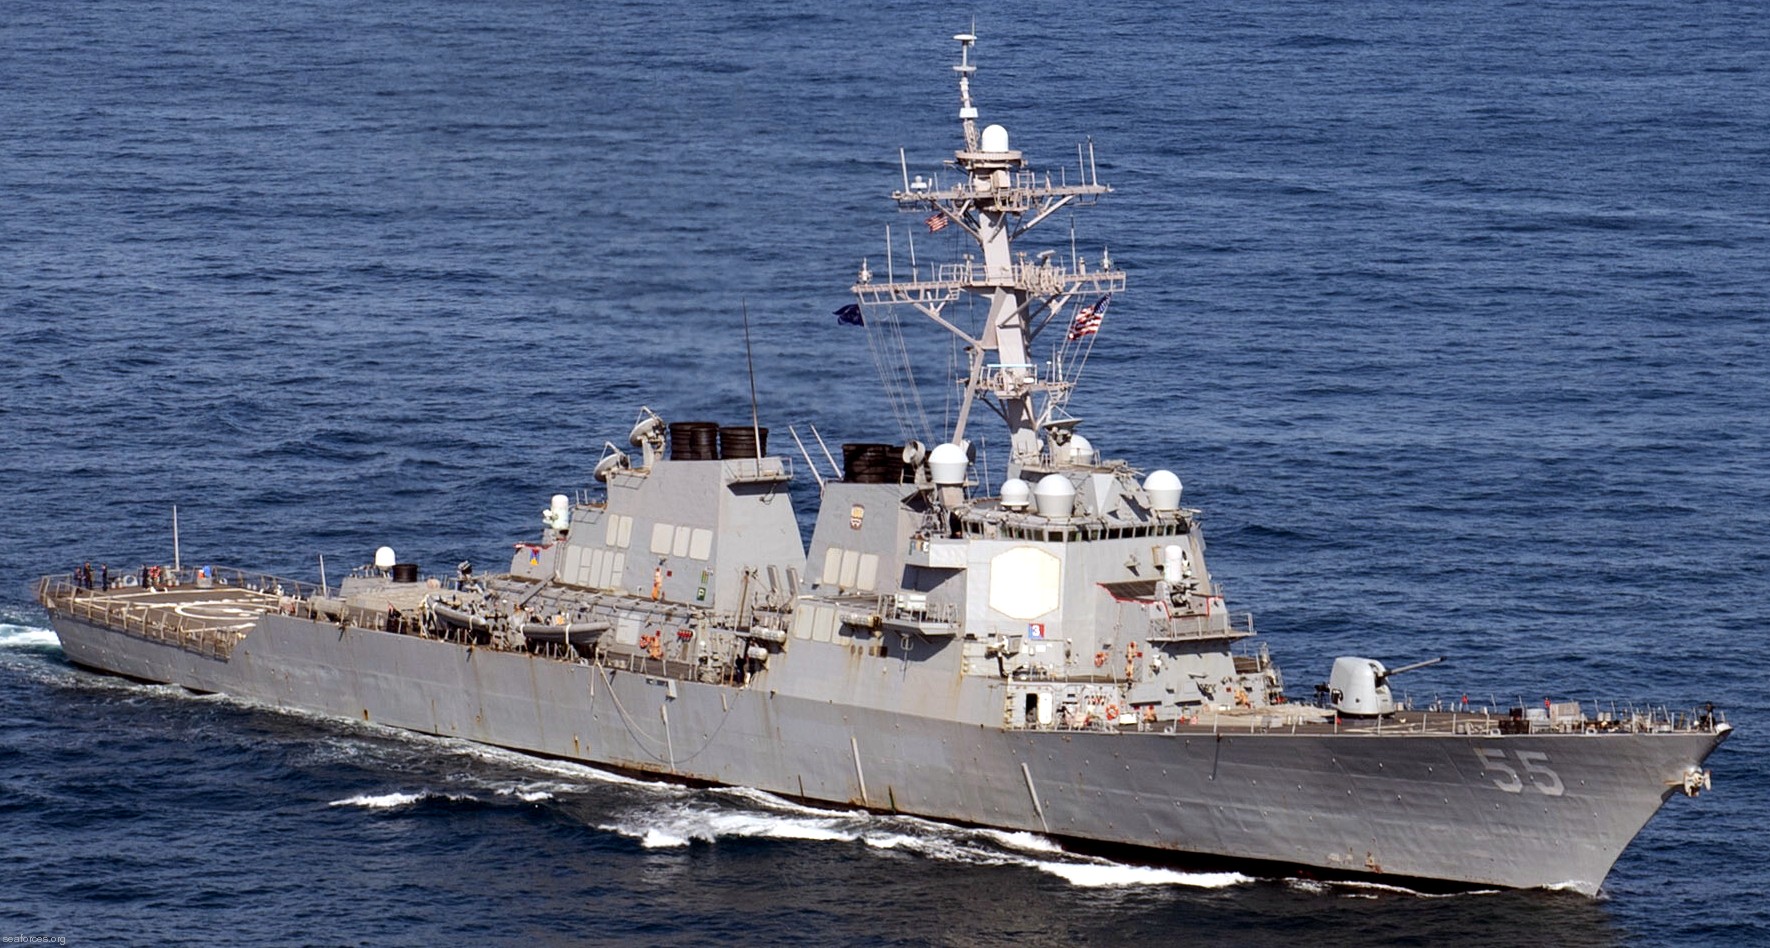 ddg-55 uss stout arleigh burke class guided missile destroyer us navy 96